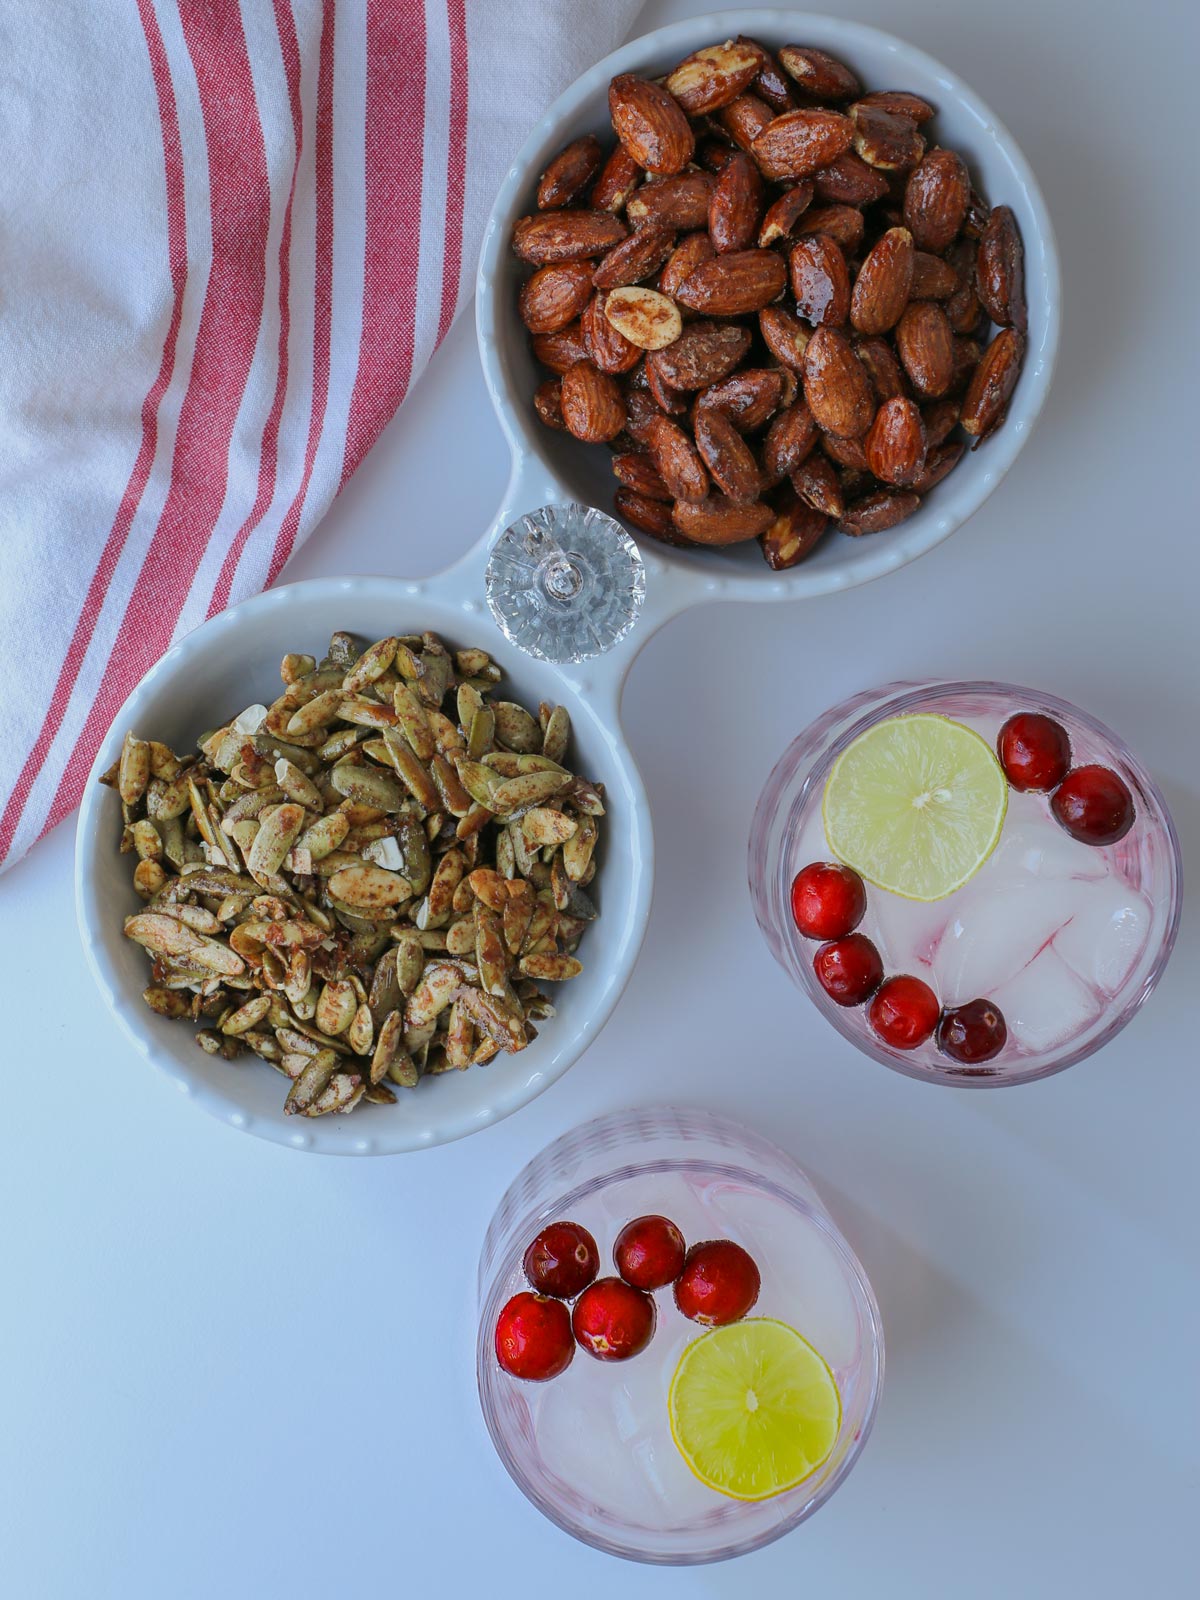 bowls of candied almonds and pipits next to cocktails on white table with cloth.